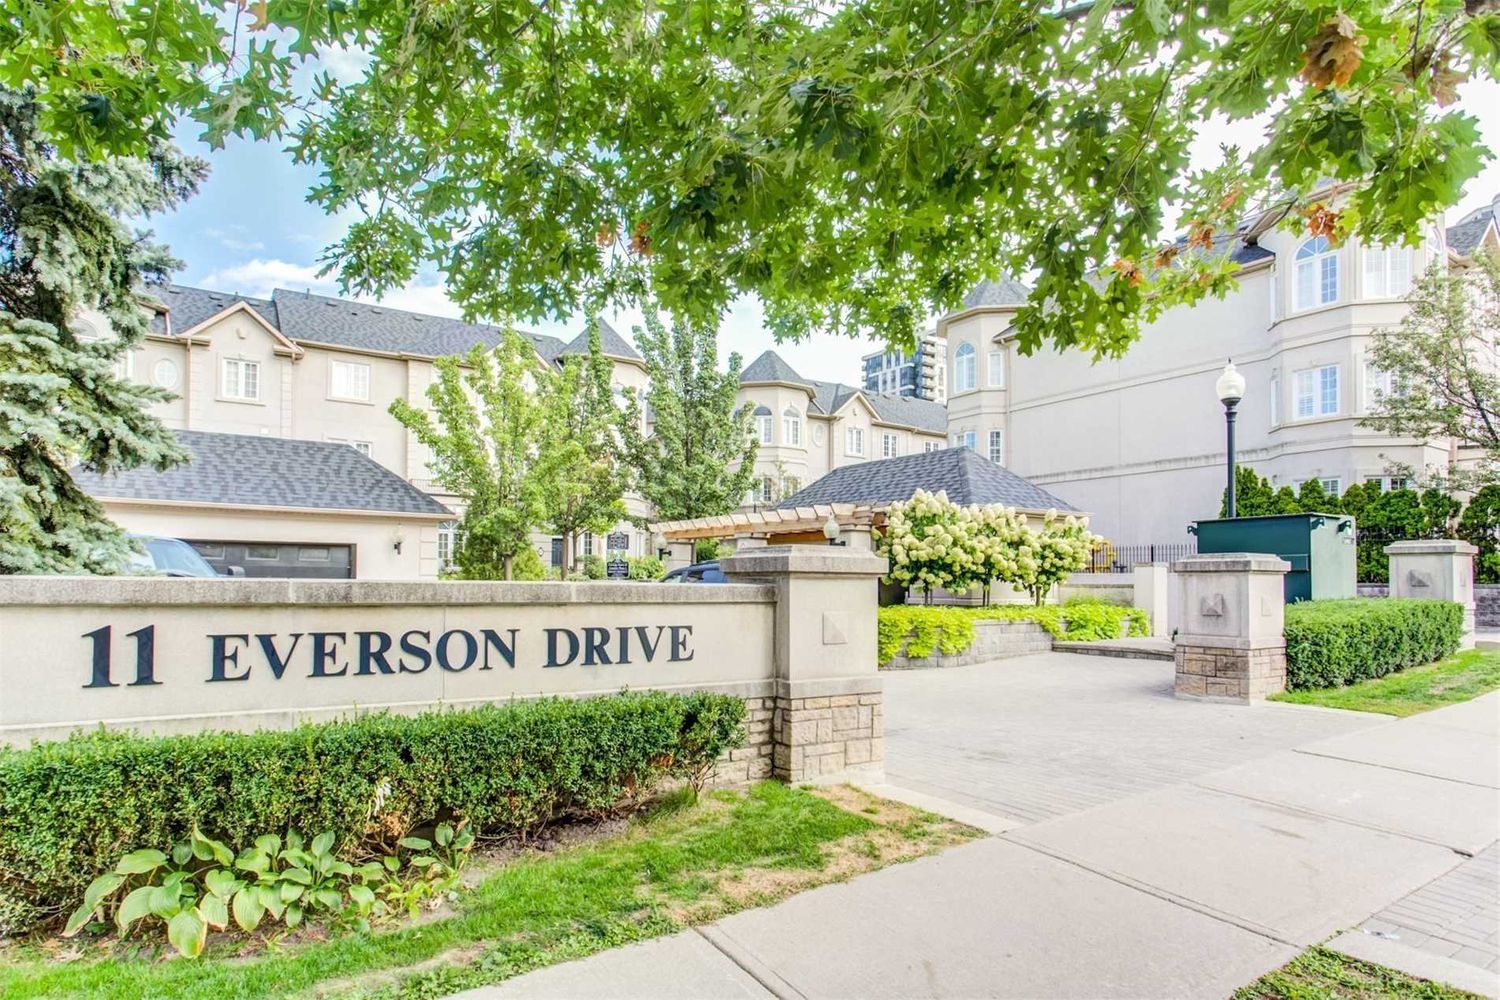 11 Everson Drive. Carriage Homes of Avondale - Phase One is located in  North York, Toronto - image #2 of 3